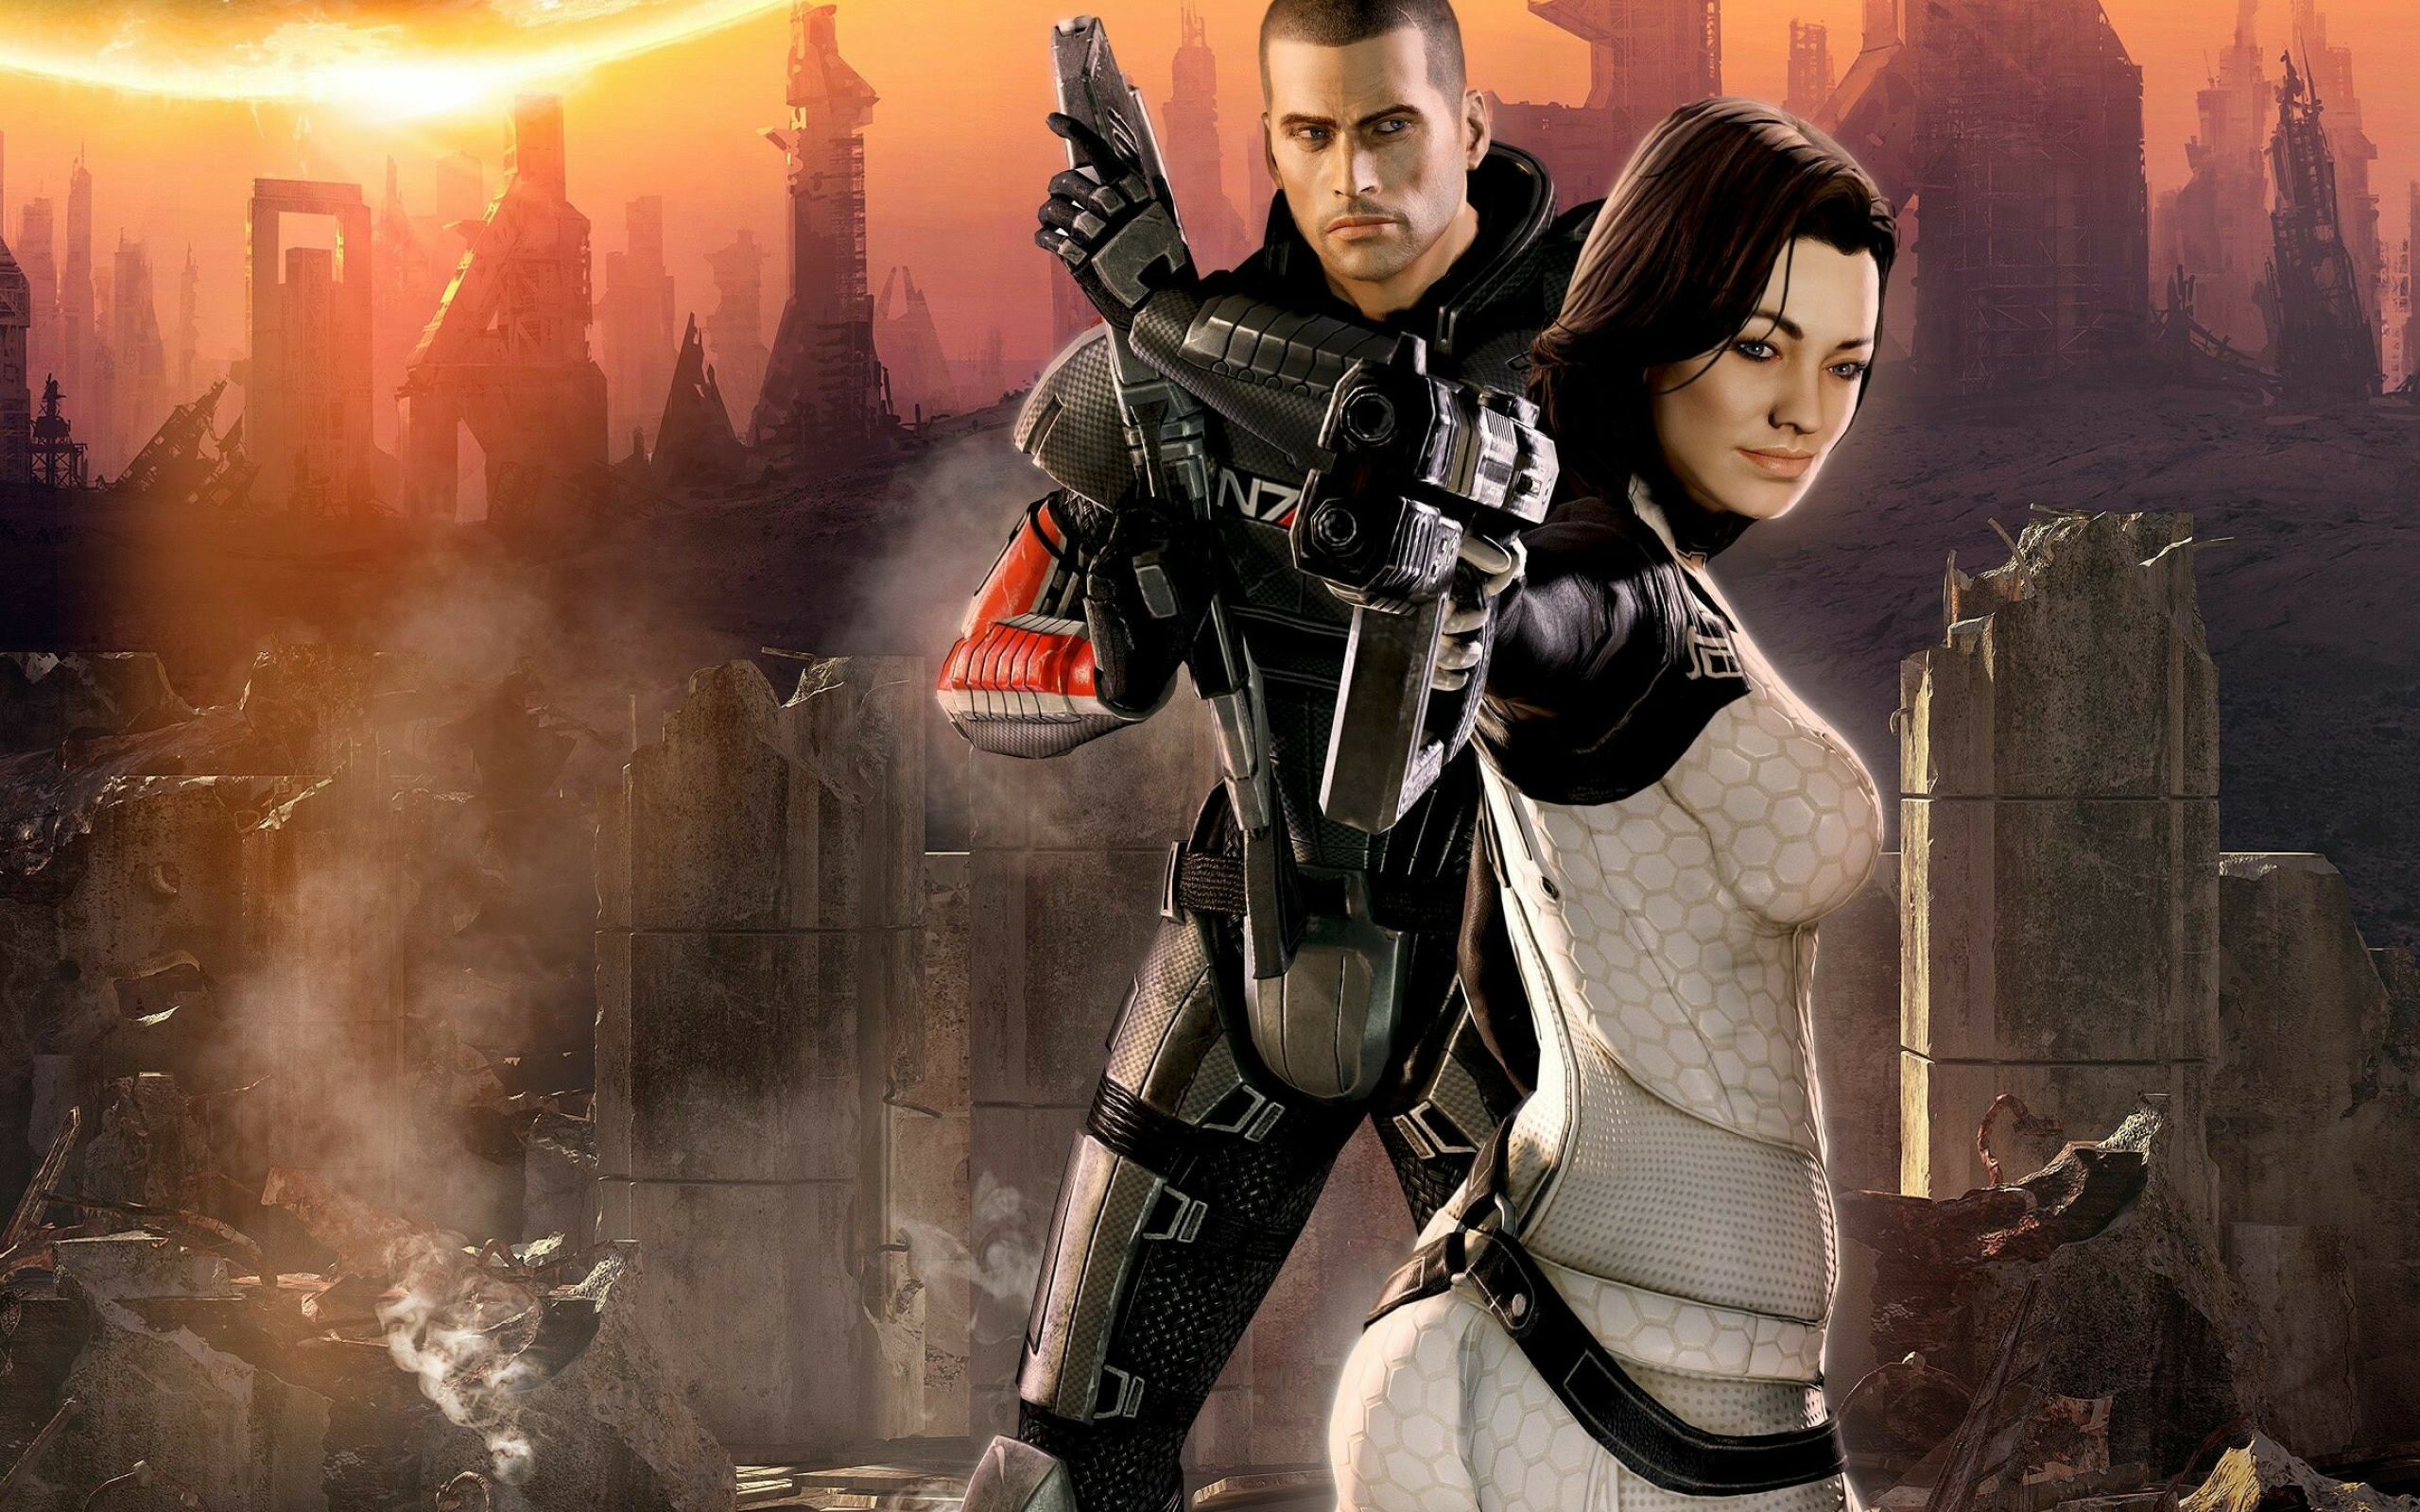 Mass Effect 2: A science-fiction role-playing action game developed by BioWare for the Xbox 360, PC, and PlayStation 3. 2560x1600 HD Background.